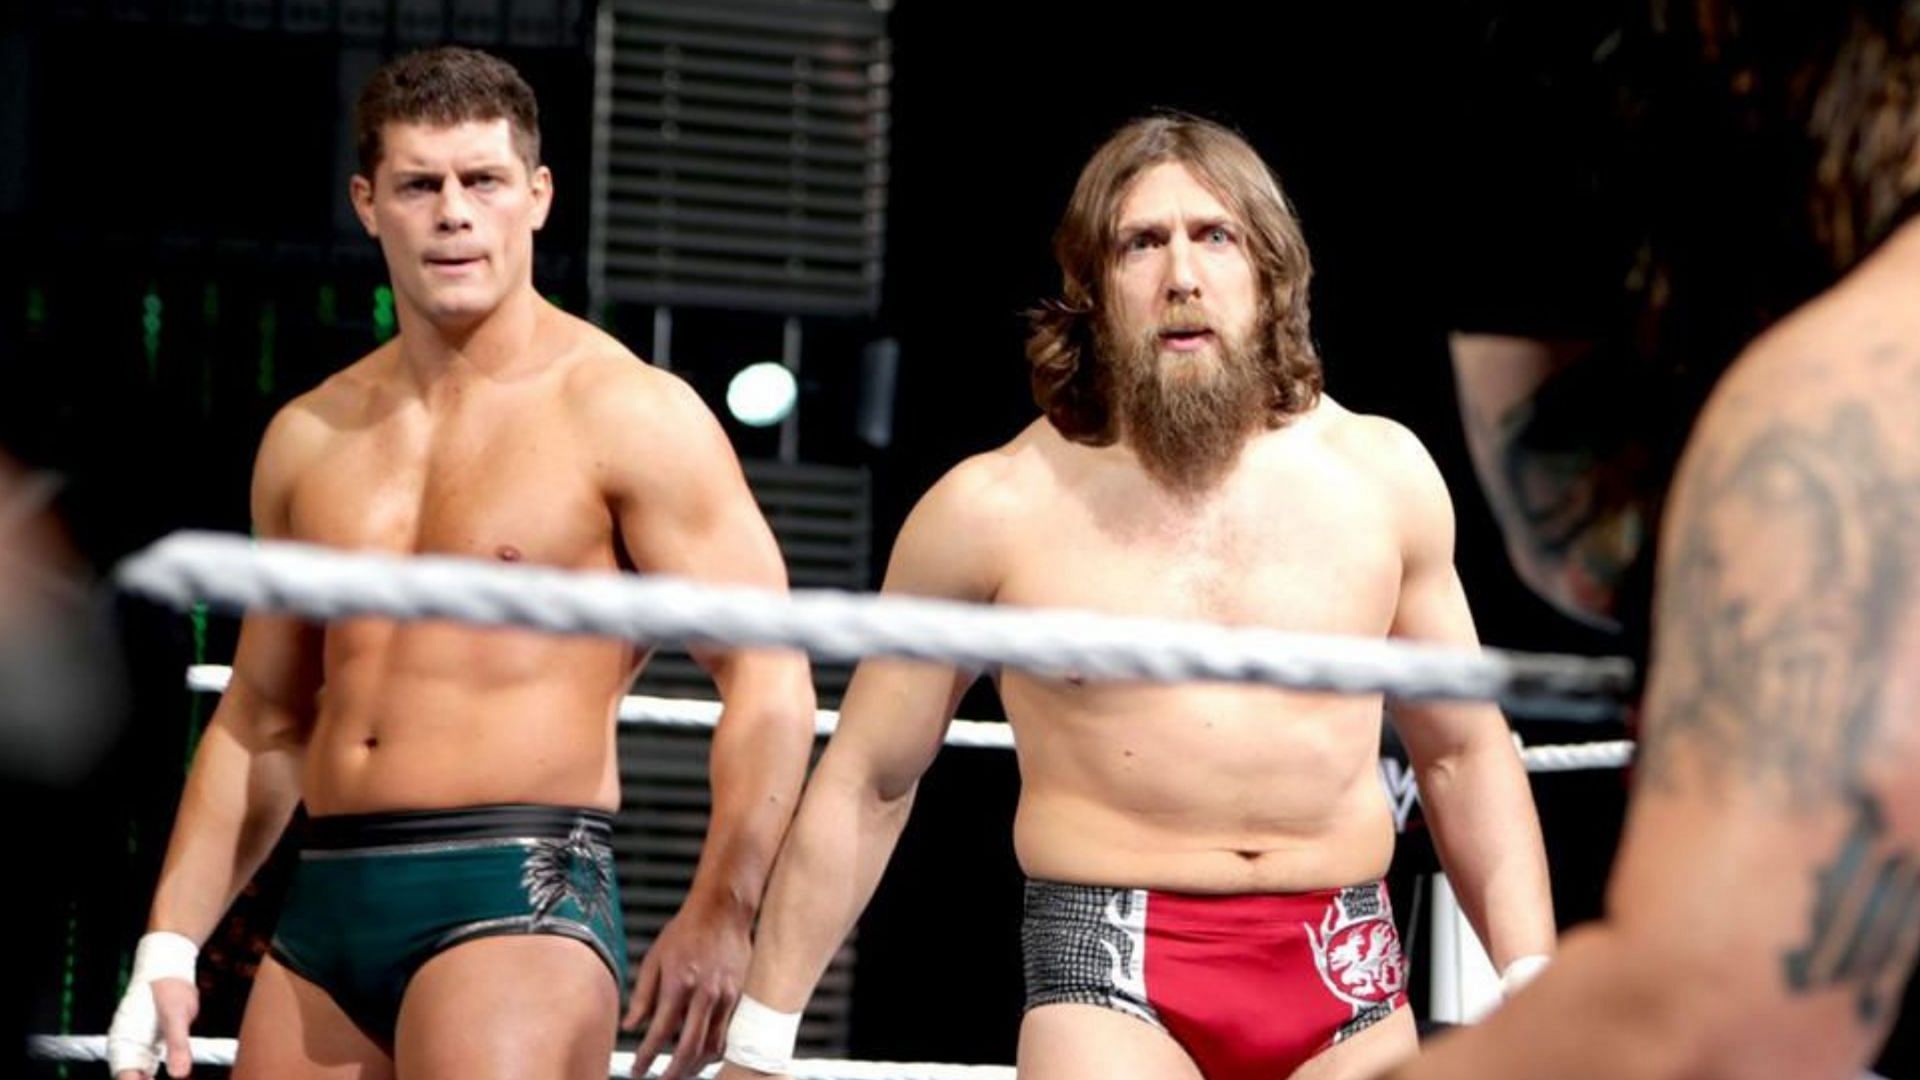 Cody Rhodes and Bryan Danielson traveled together